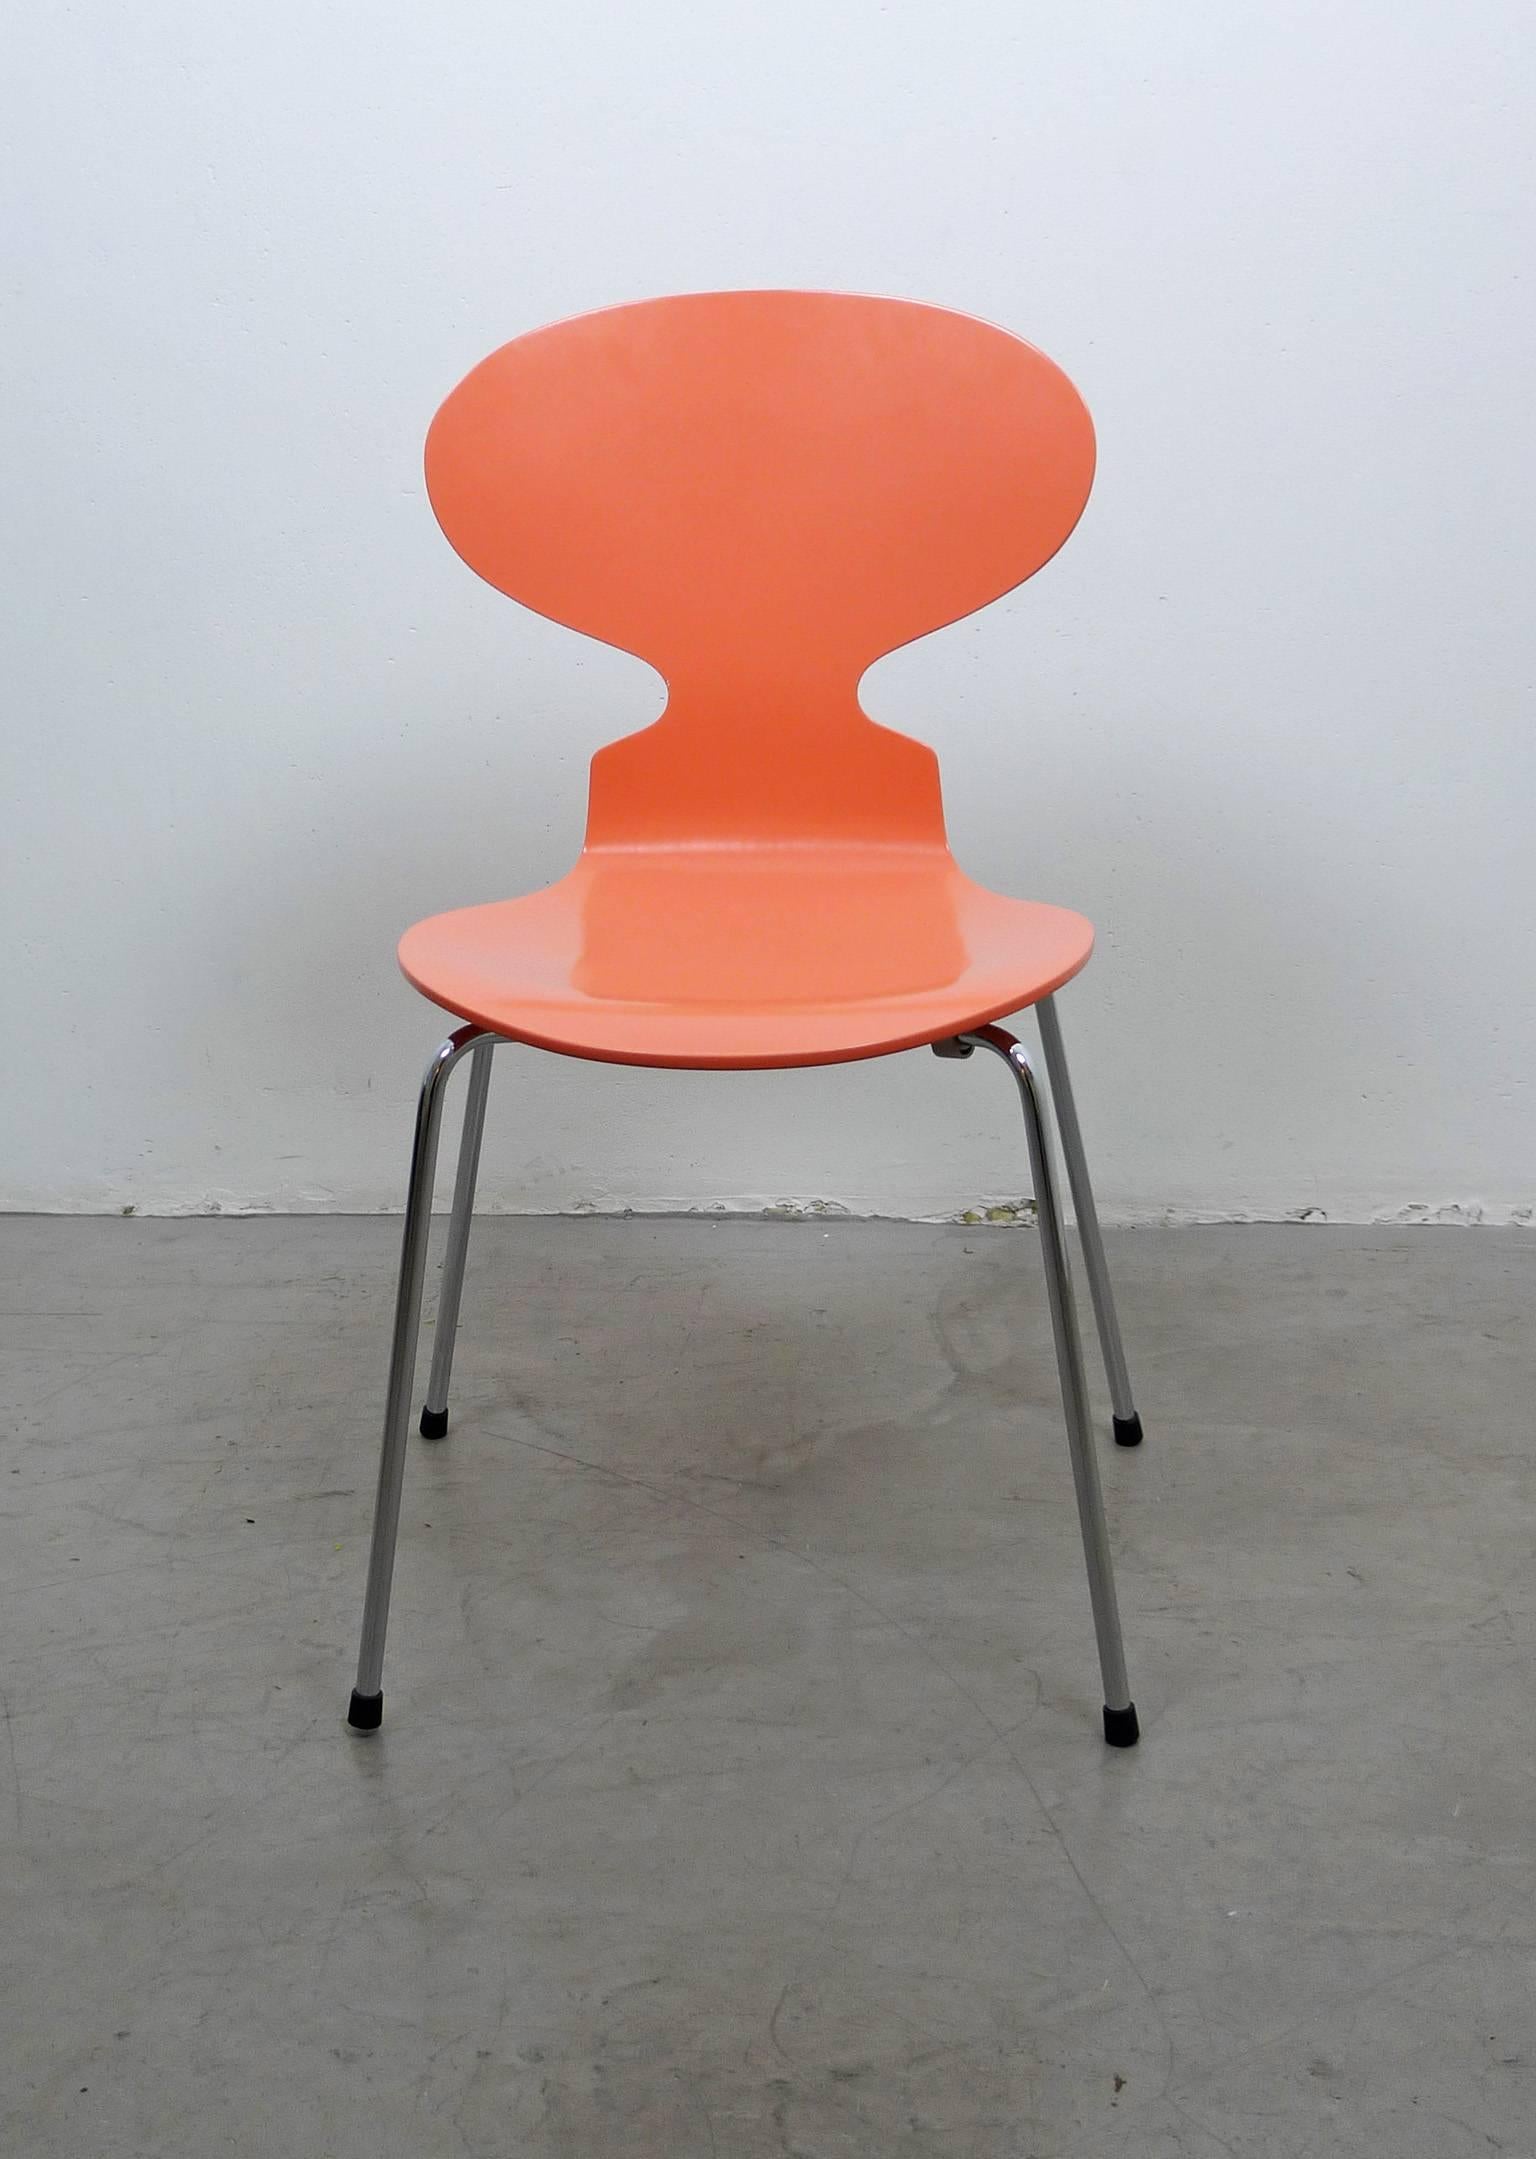 The Ant chair Model 3101 was designed by Arne Jacobsen in 1952 and produced by the Danish furniture manufacturer Fritz Hansen. It features a chromed stacking structure and a lacquered seat in laminated wood. The color is Peach, number 53. The chair